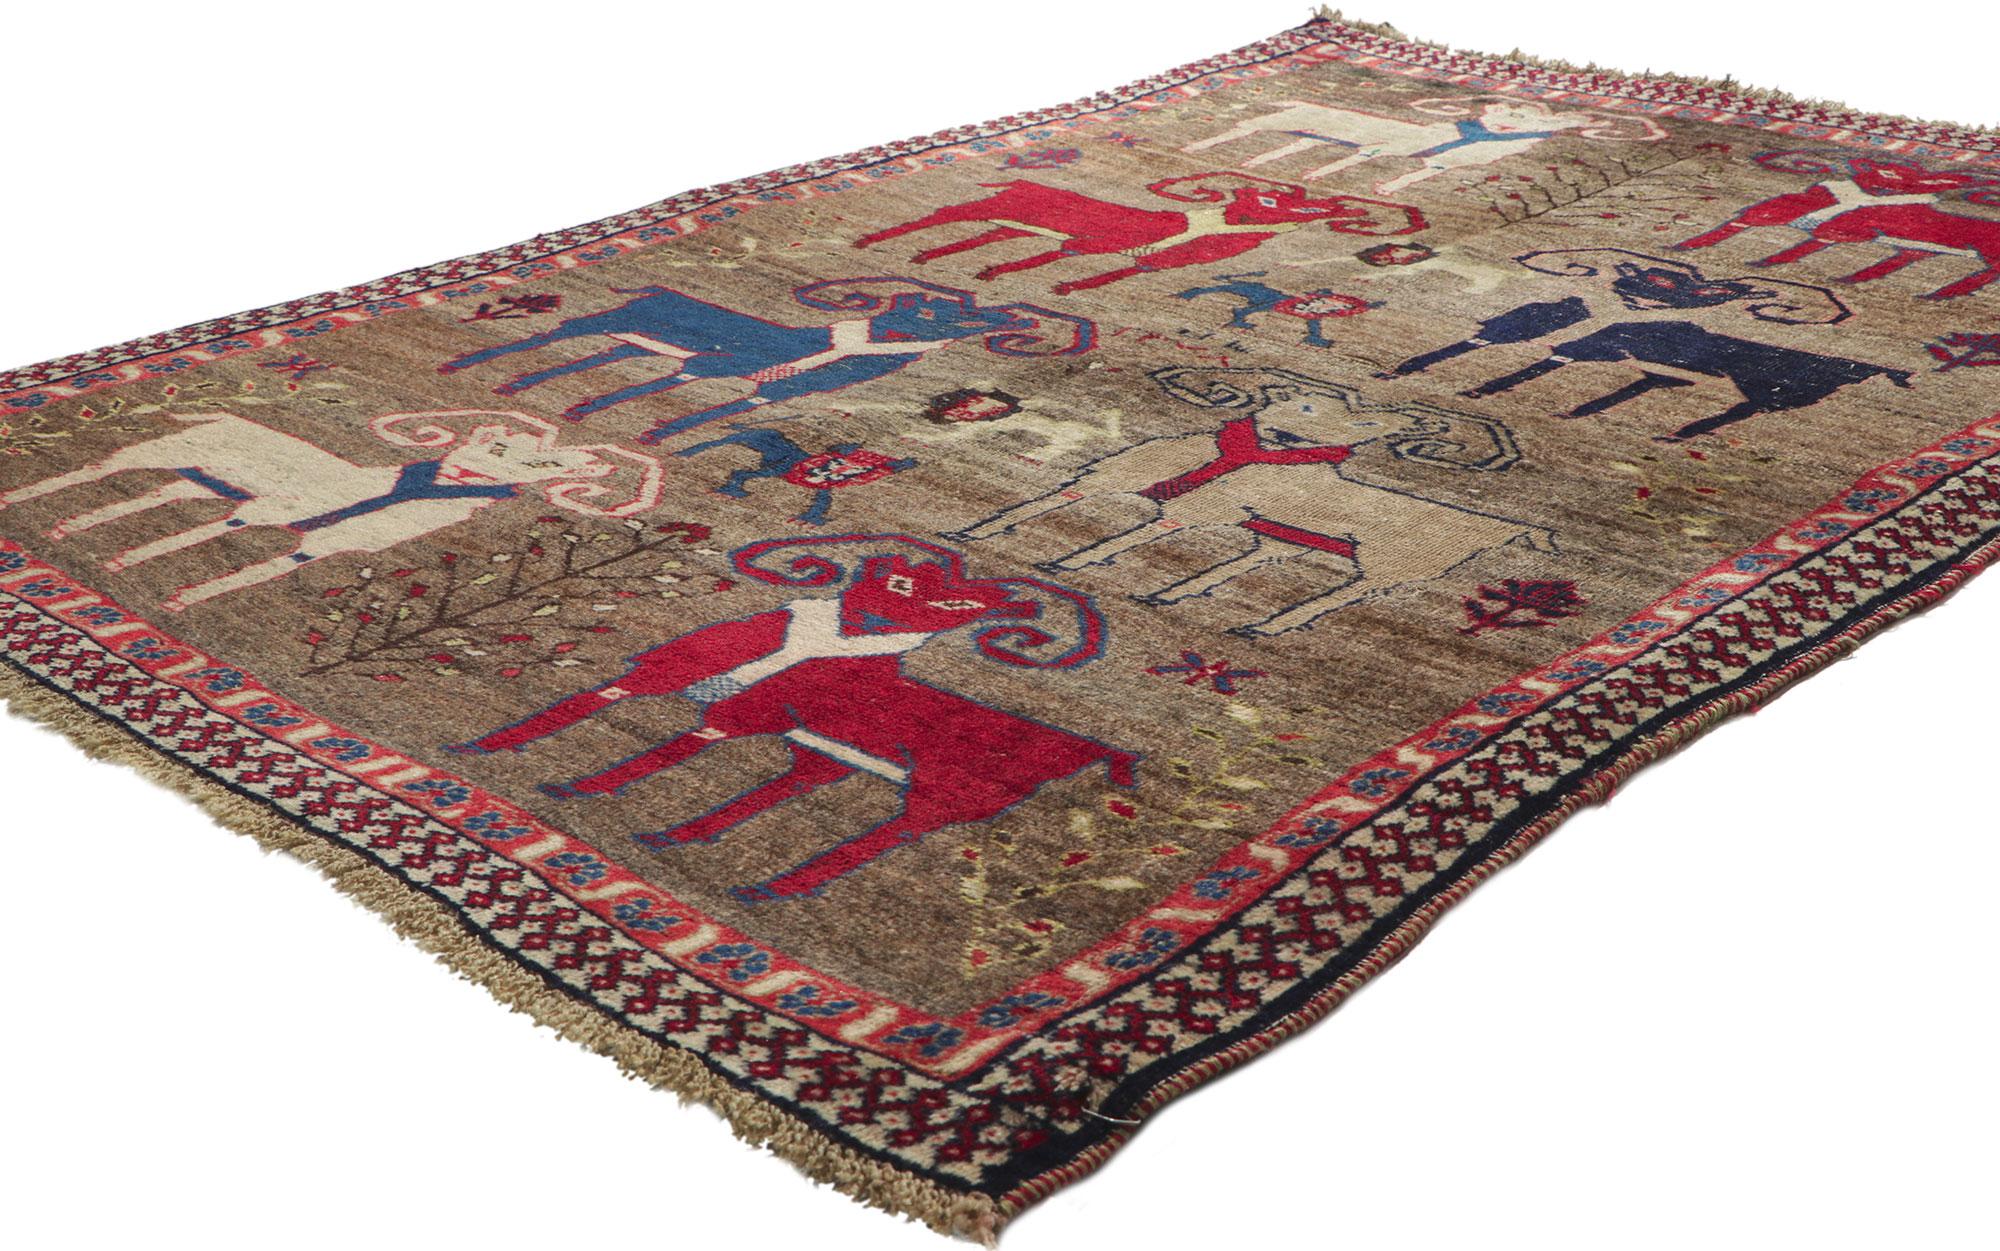 61155 Vintage Persian Gabbeh Rug, 03'10 x 05'09. Reminiscences of an exotic journey and worldly sophistication, this hand-knotted wool vintage Persian Gabbeh rug is a captivating vision of woven beauty. The eye-catching animal pictorial and earthy